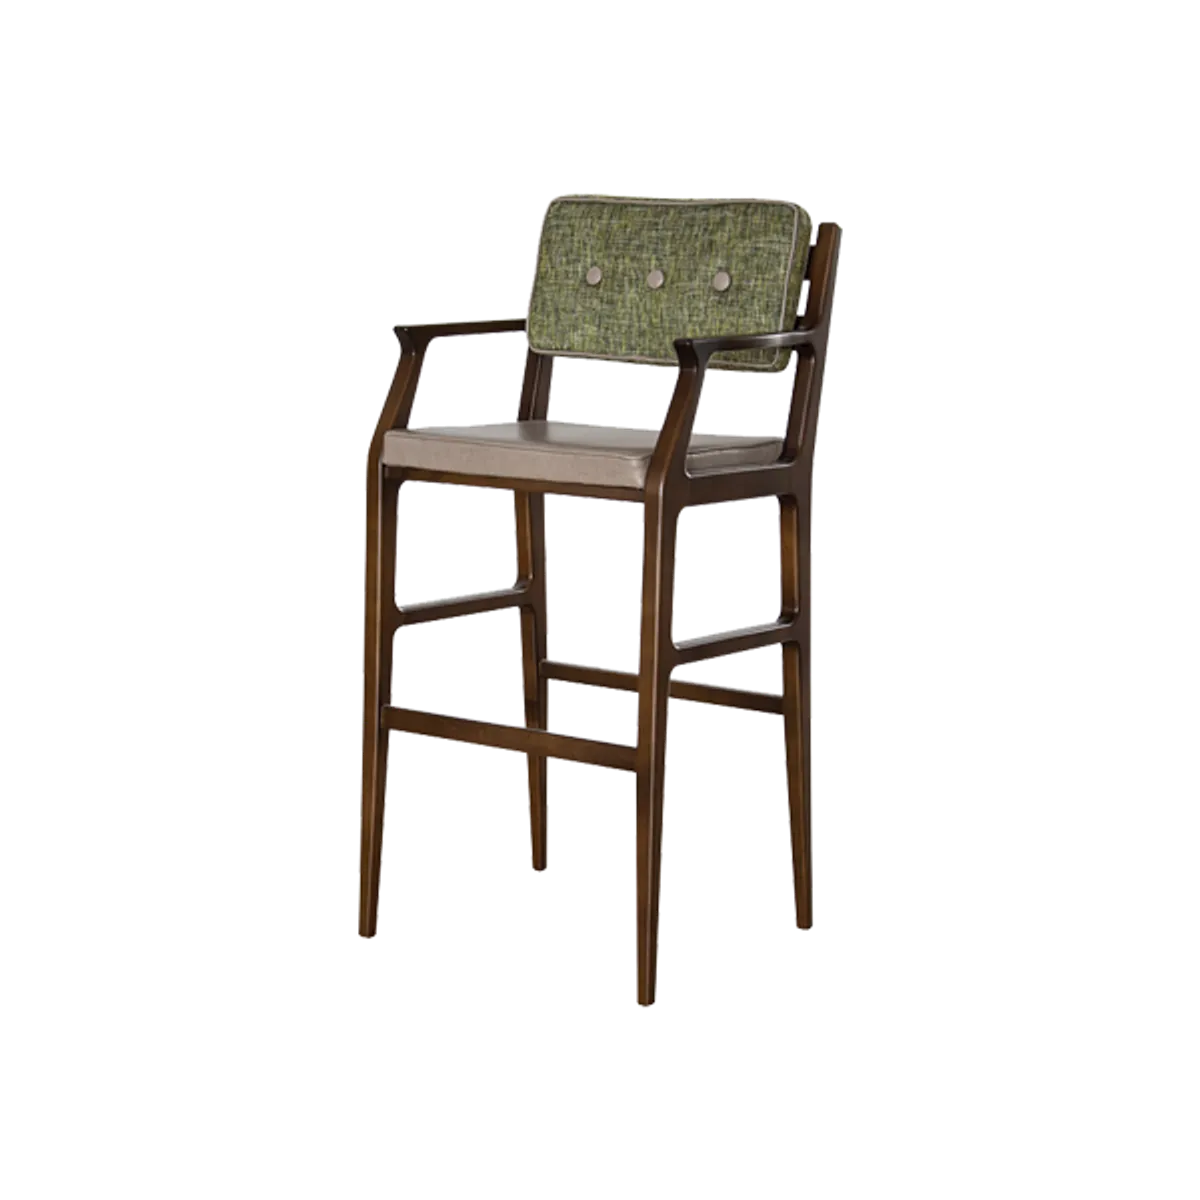 Web Linden Bar Stool Wooden Frame Stool For Bars And Hotels